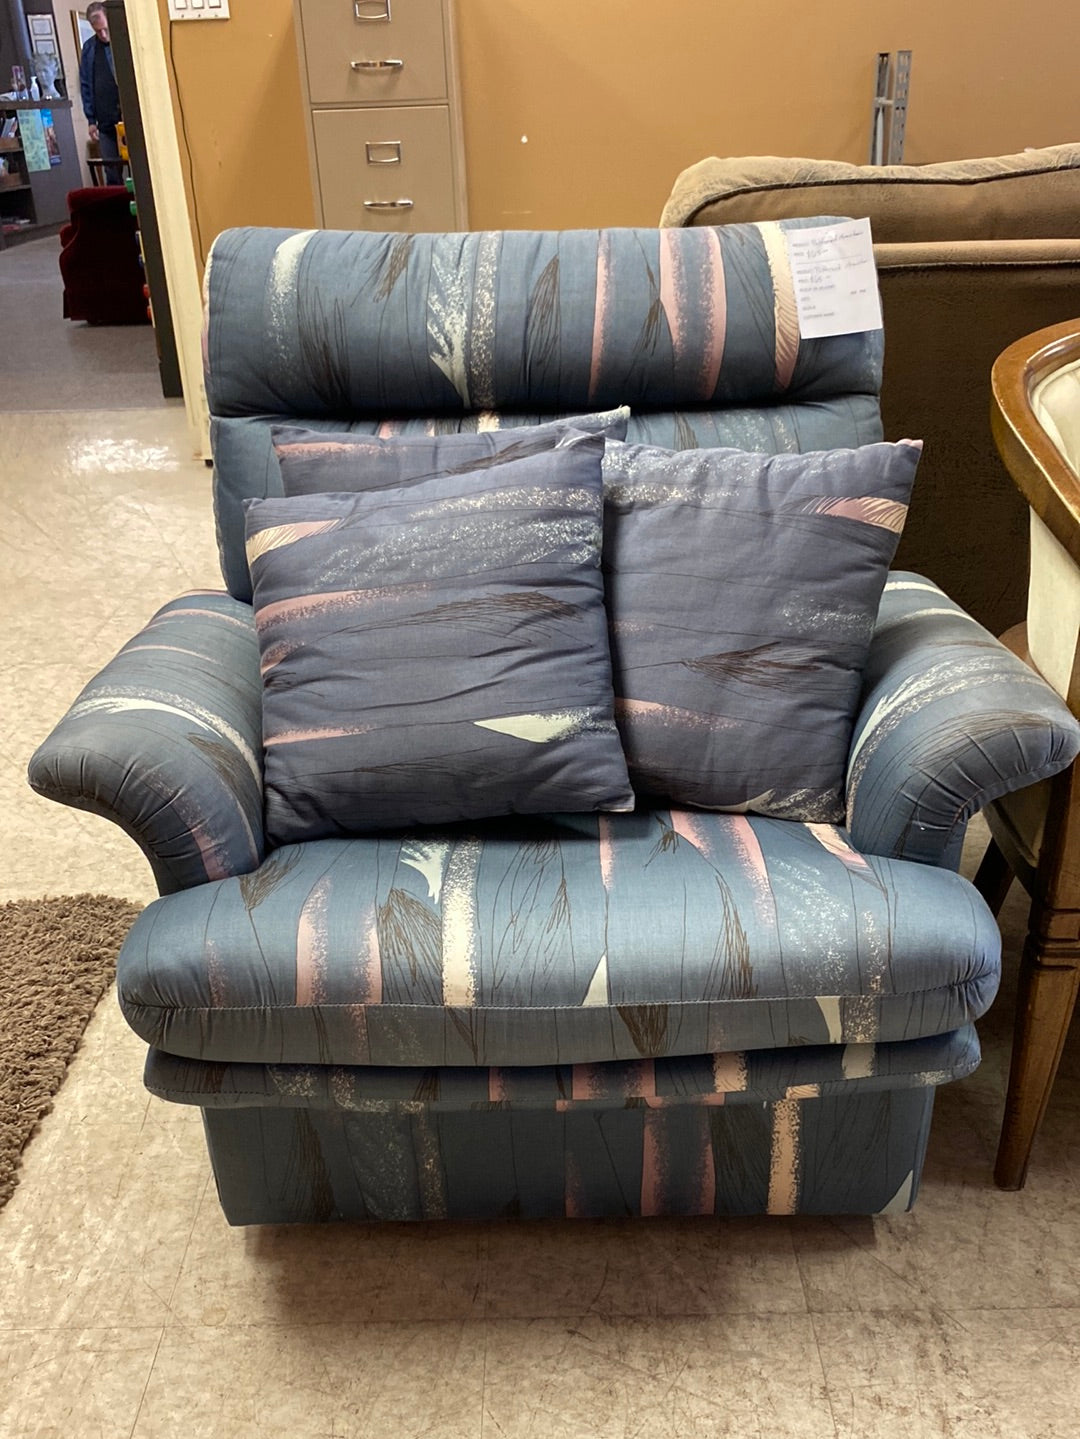 Patterned Armchair